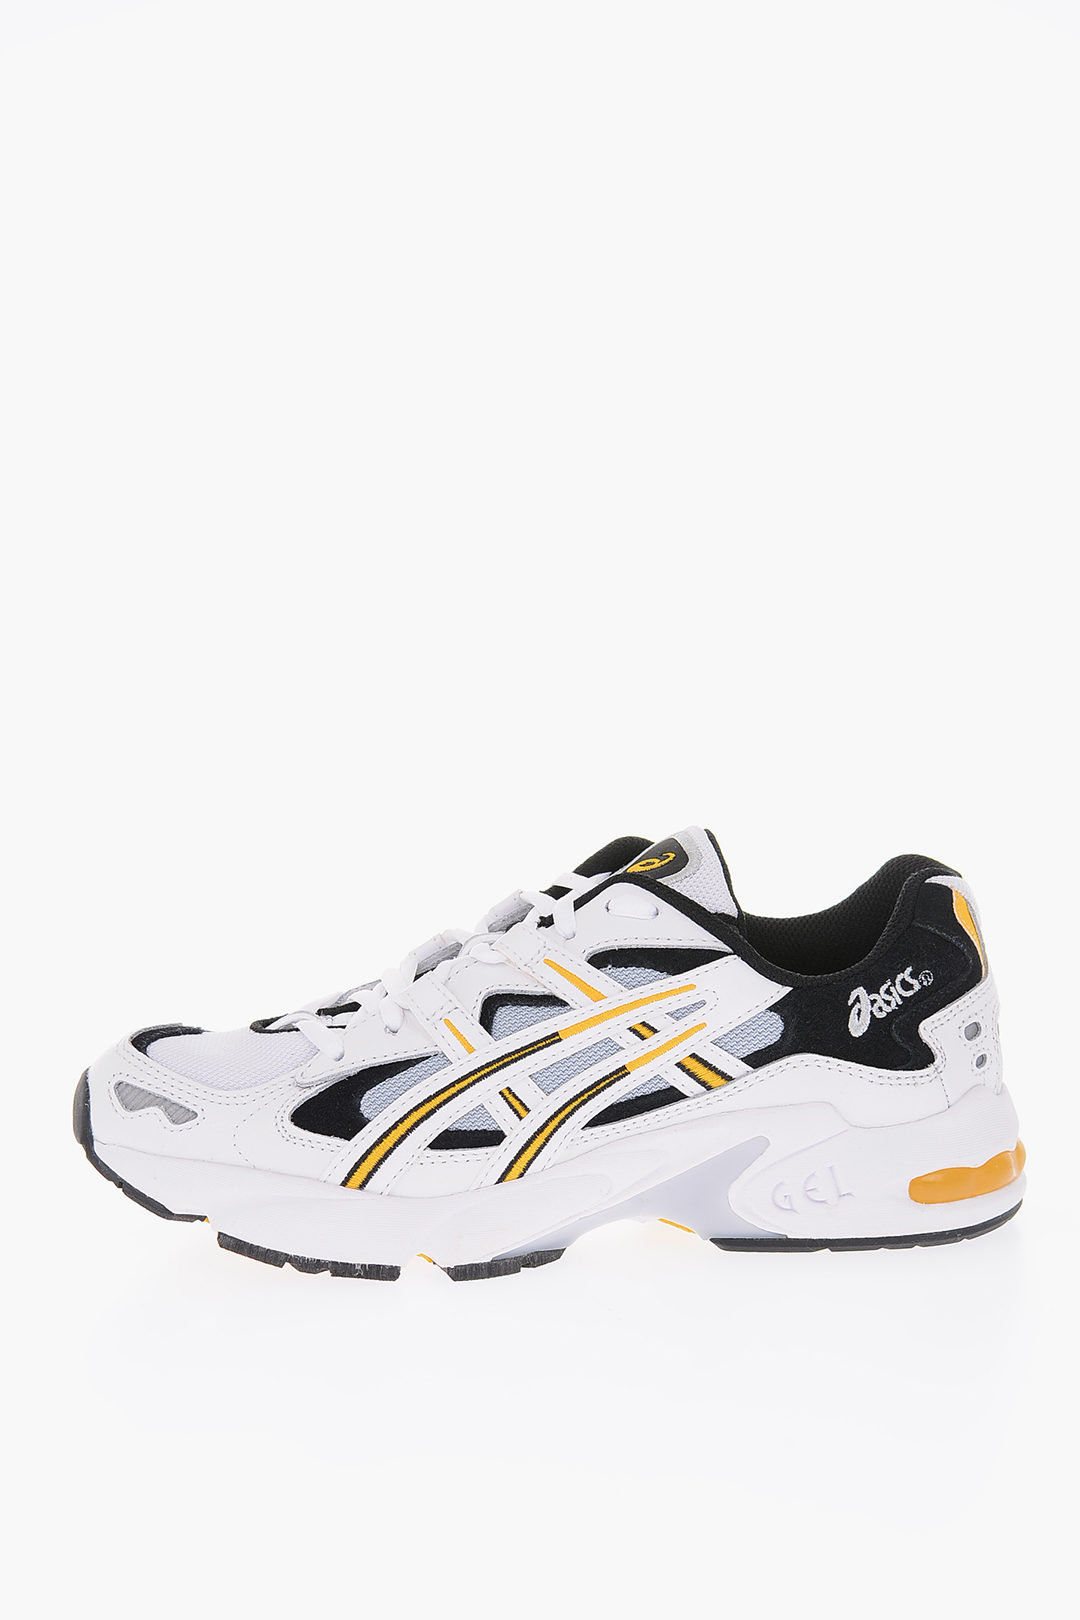 Asics Leather And Fabric Gel-Kayano 5 Og Sneakers Men - Glamood Outlet